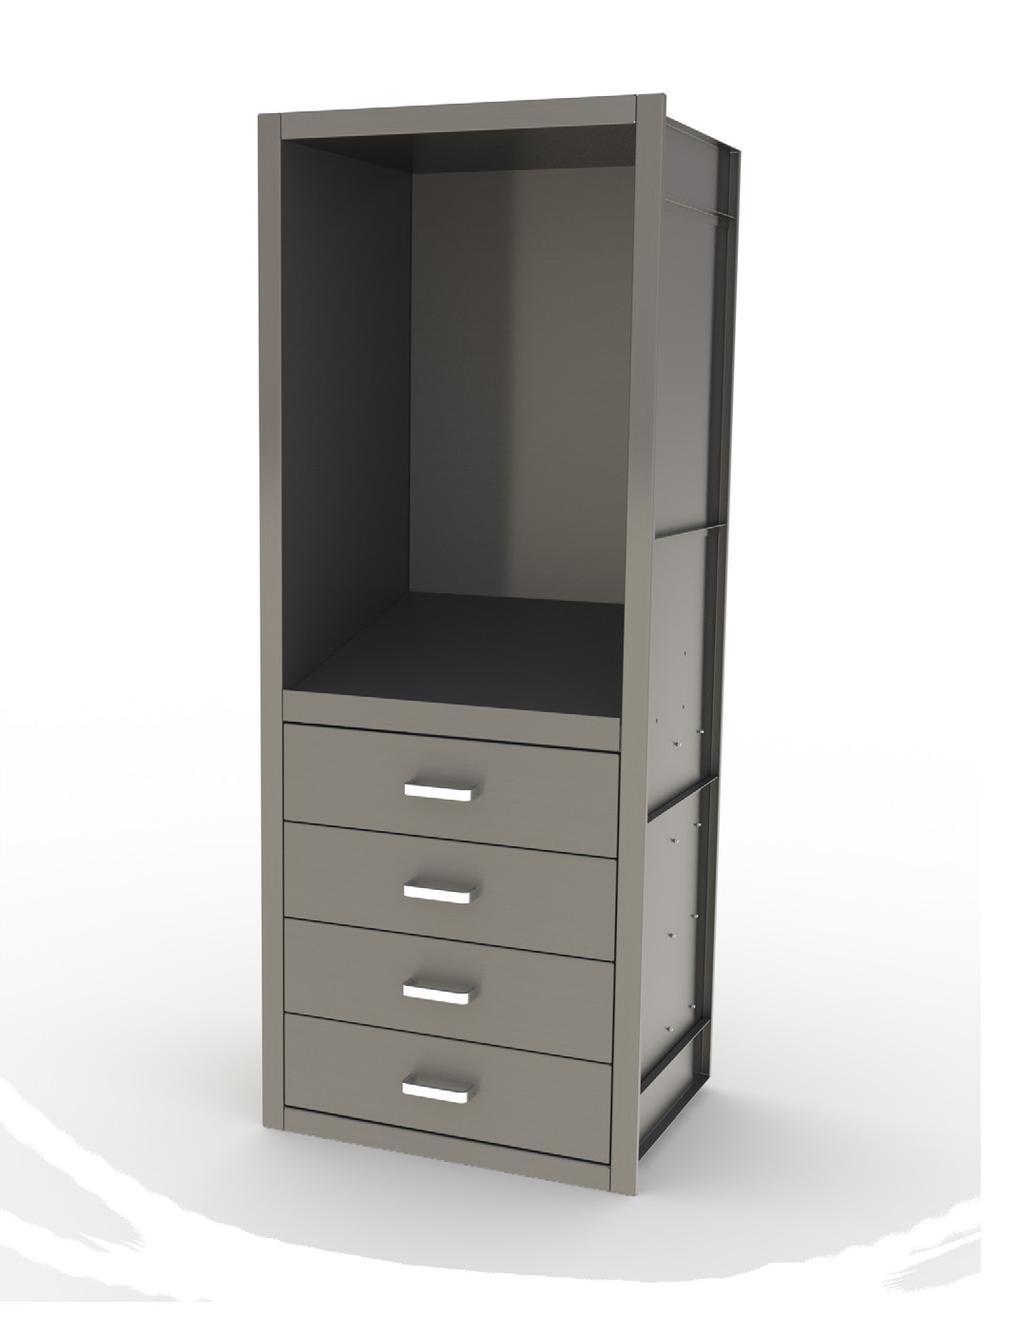 Desk Cabinets Recessed or free standing Fully welded construction Standard handles Full CAD renderings Engineered room layouts in CAD based on customer provided drawing Multiple layouts for